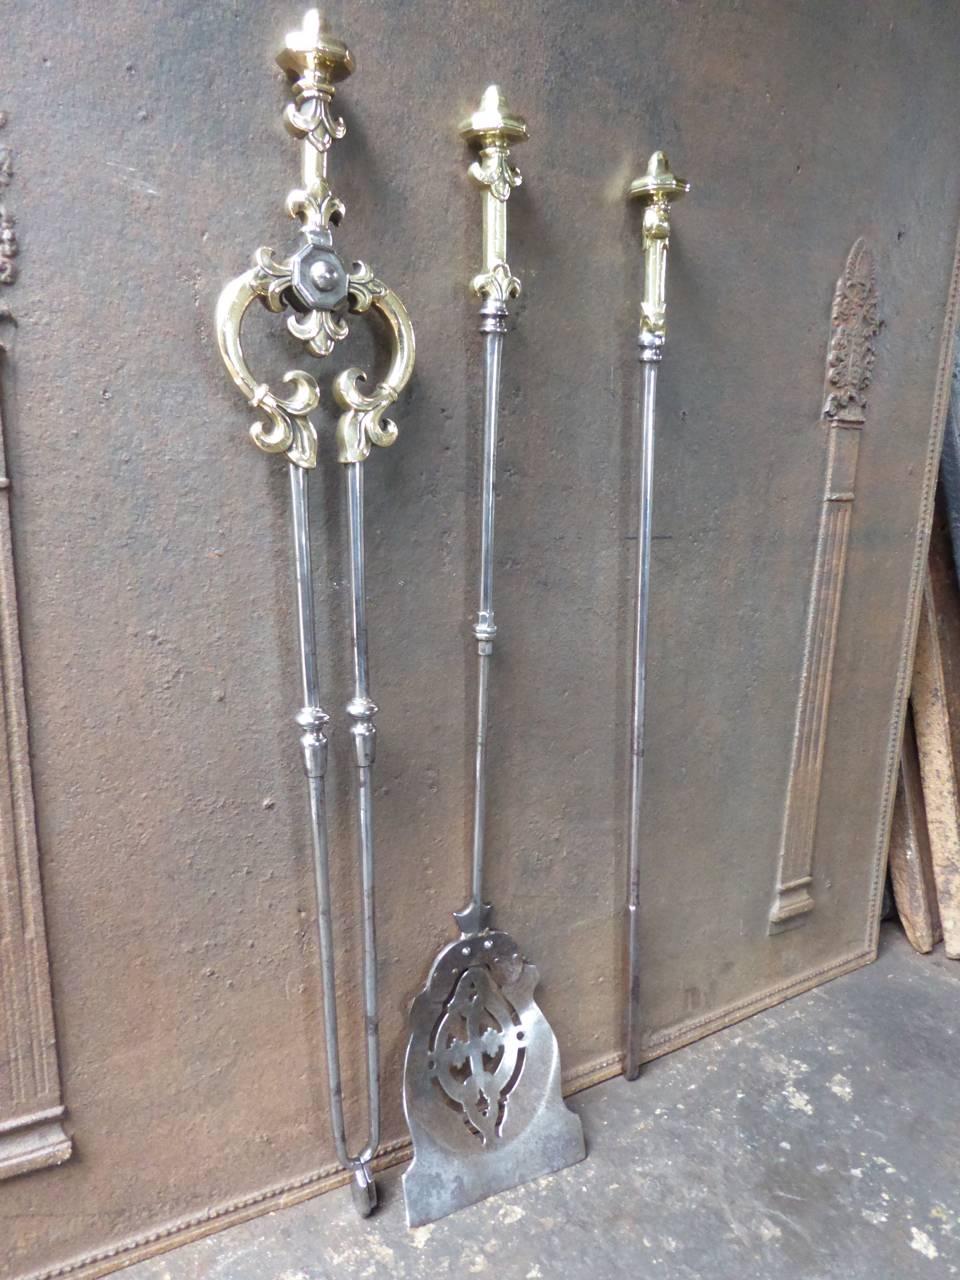 19th century English fireplace tool set or fire irons made of polished steel and polished brass.